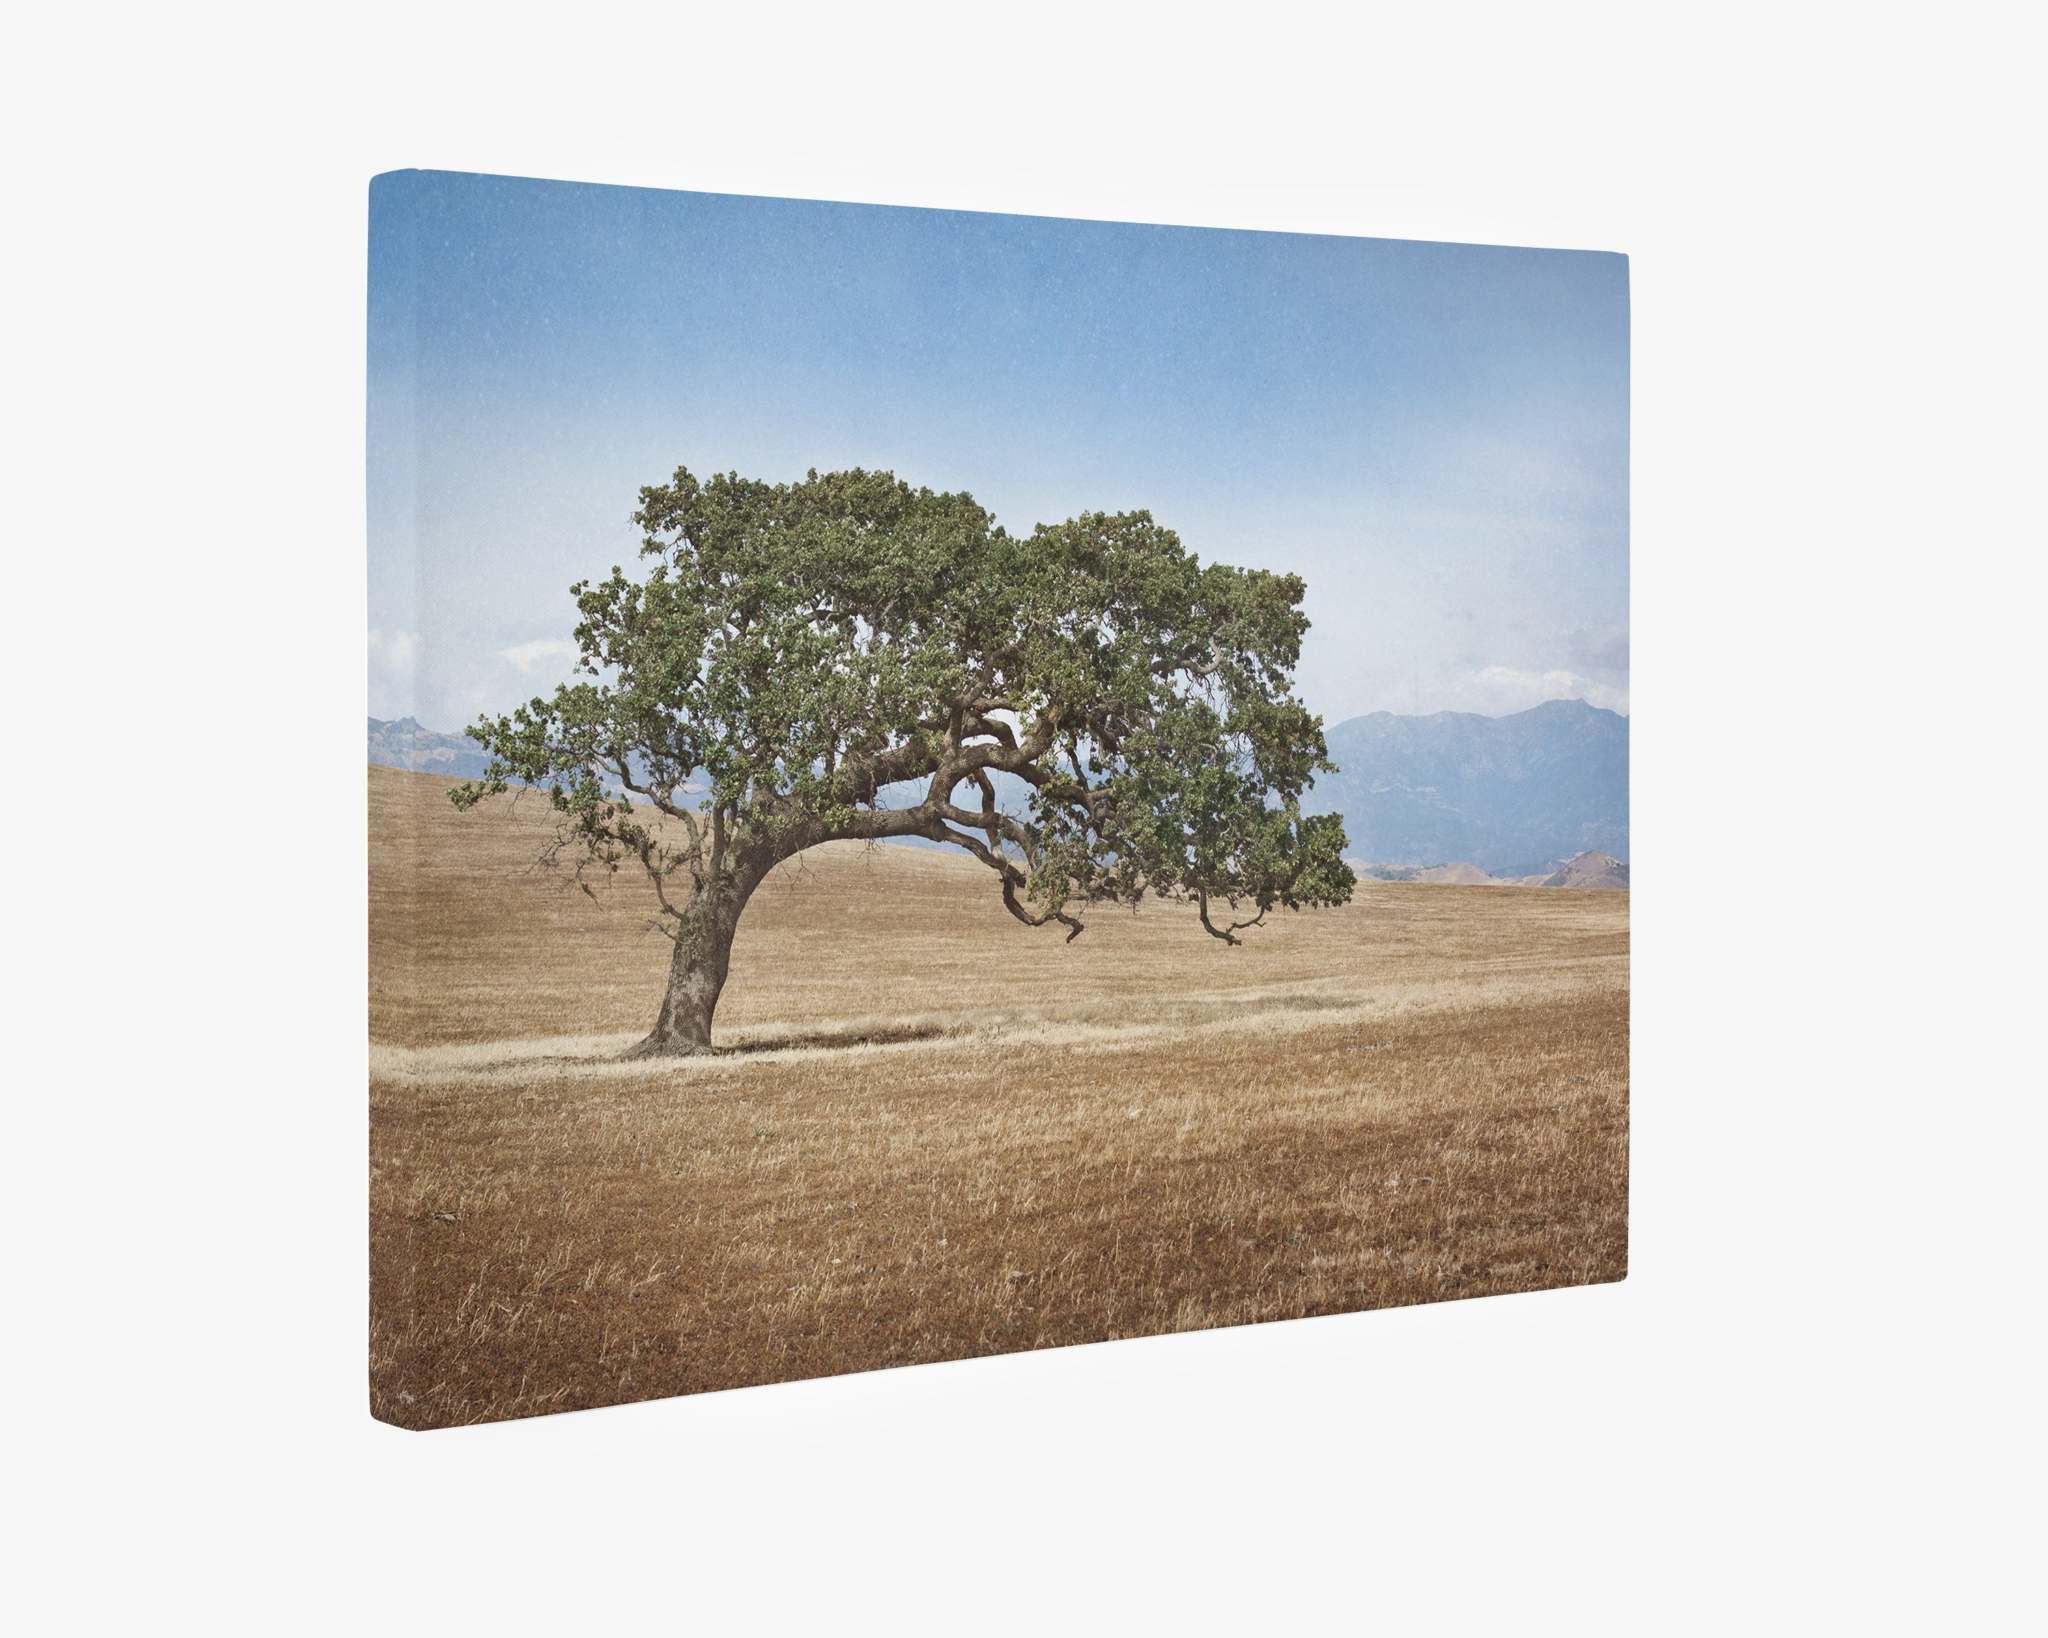 A lone tree with a sprawling canopy stands in a dry, empty field. The background features distant, hazy mountains under a clear blue sky. The image is presented as Offley Green's premium artist-grade California Landscape Wall Art, Oak Tree Canvas 'Windswept,' capturing the essence of California Oaks.